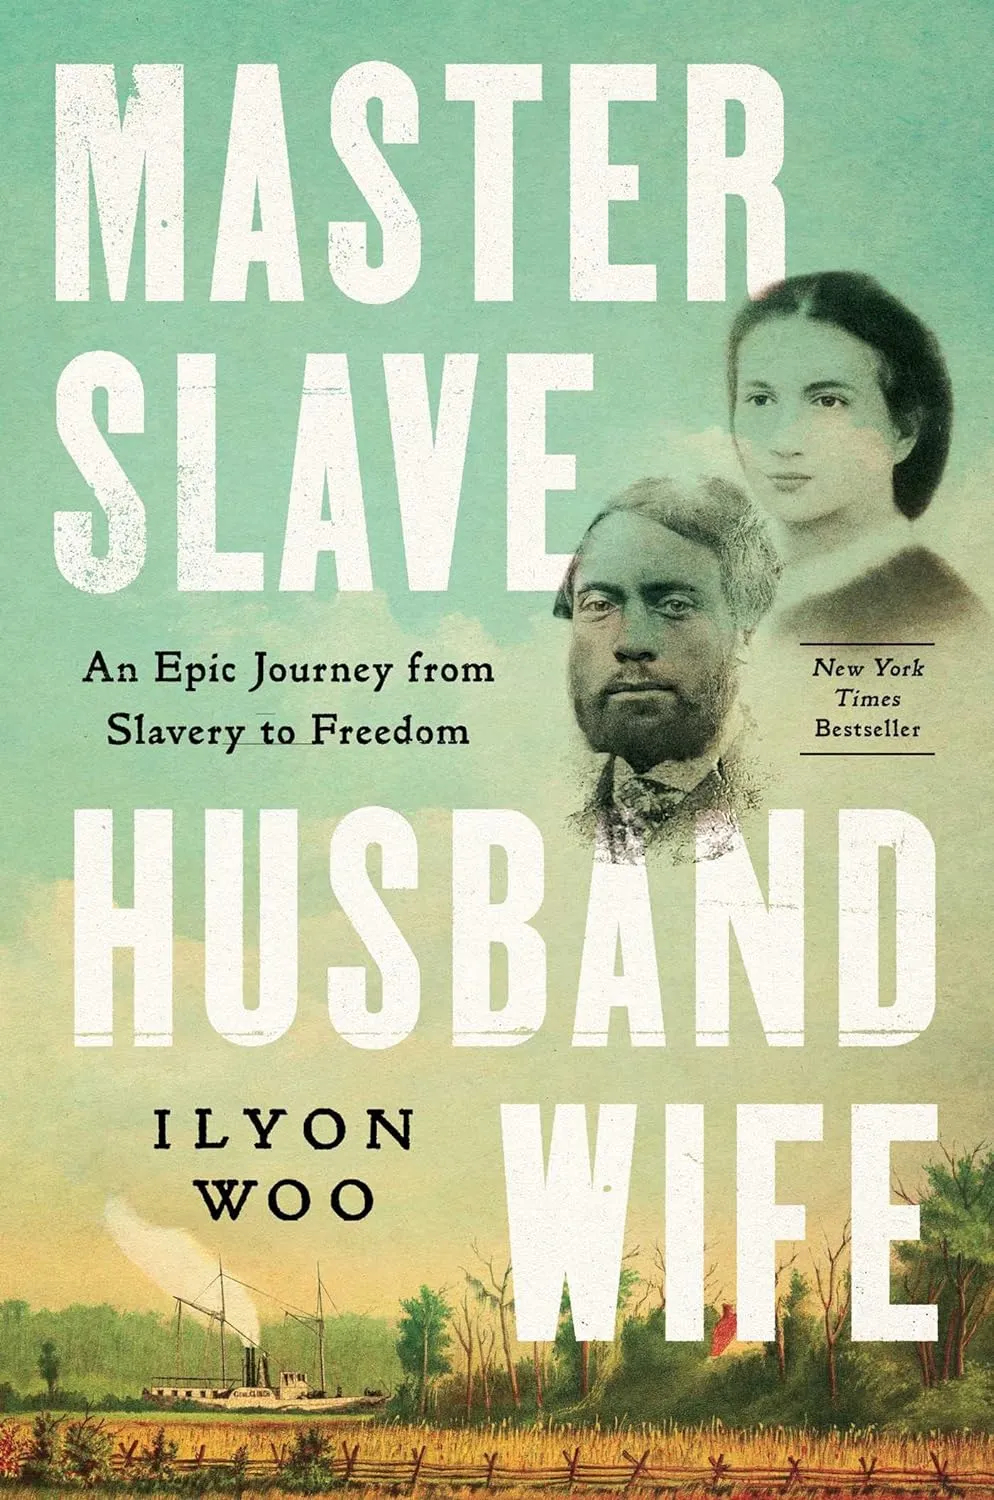 cover of Master Slave Husband Wife by Ilyon Woo (Simon & Schuster)